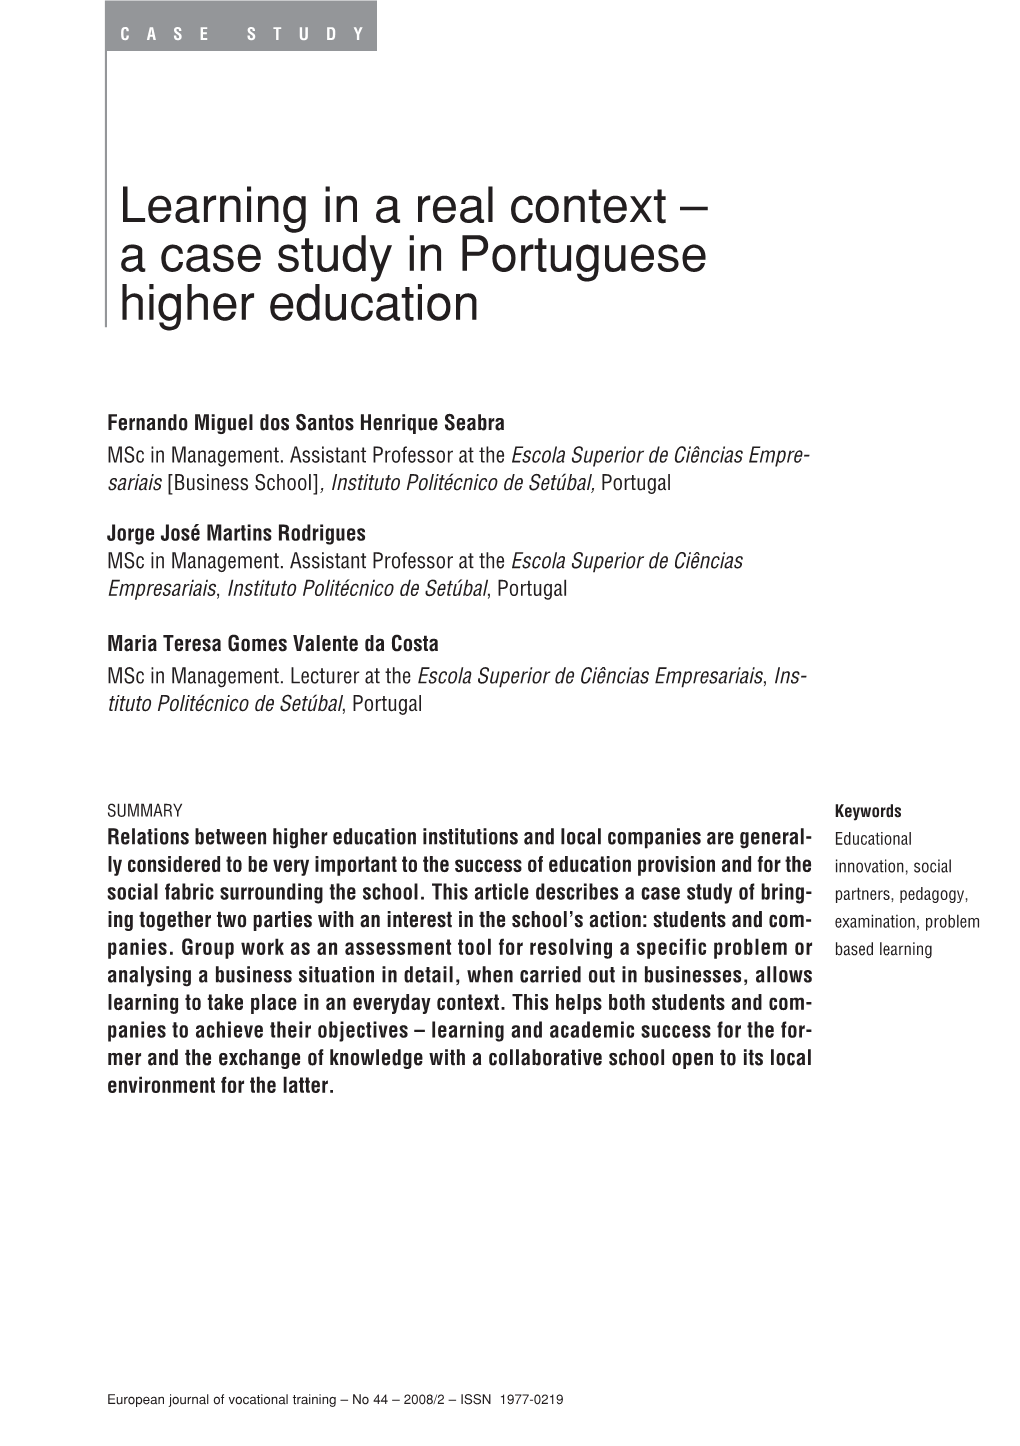 Learning in a Real Context--A Case Study in Portuguese Higher